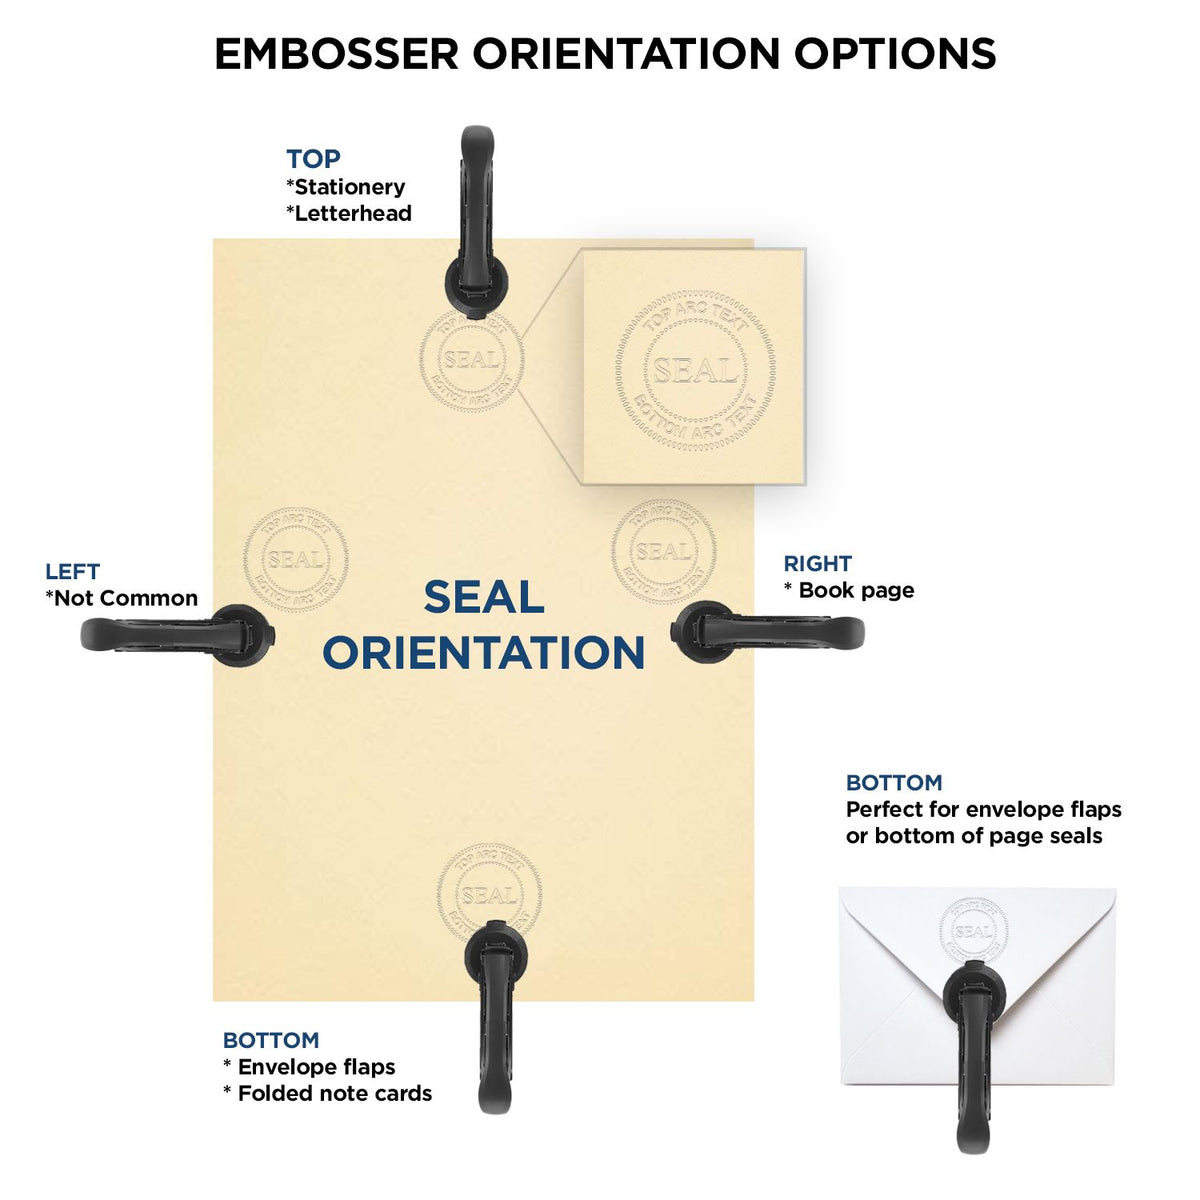 An infographic for the Gift New Jersey Engineer Seal showing embosser orientation, this is showing examples of a top, bottom, right and left insert.